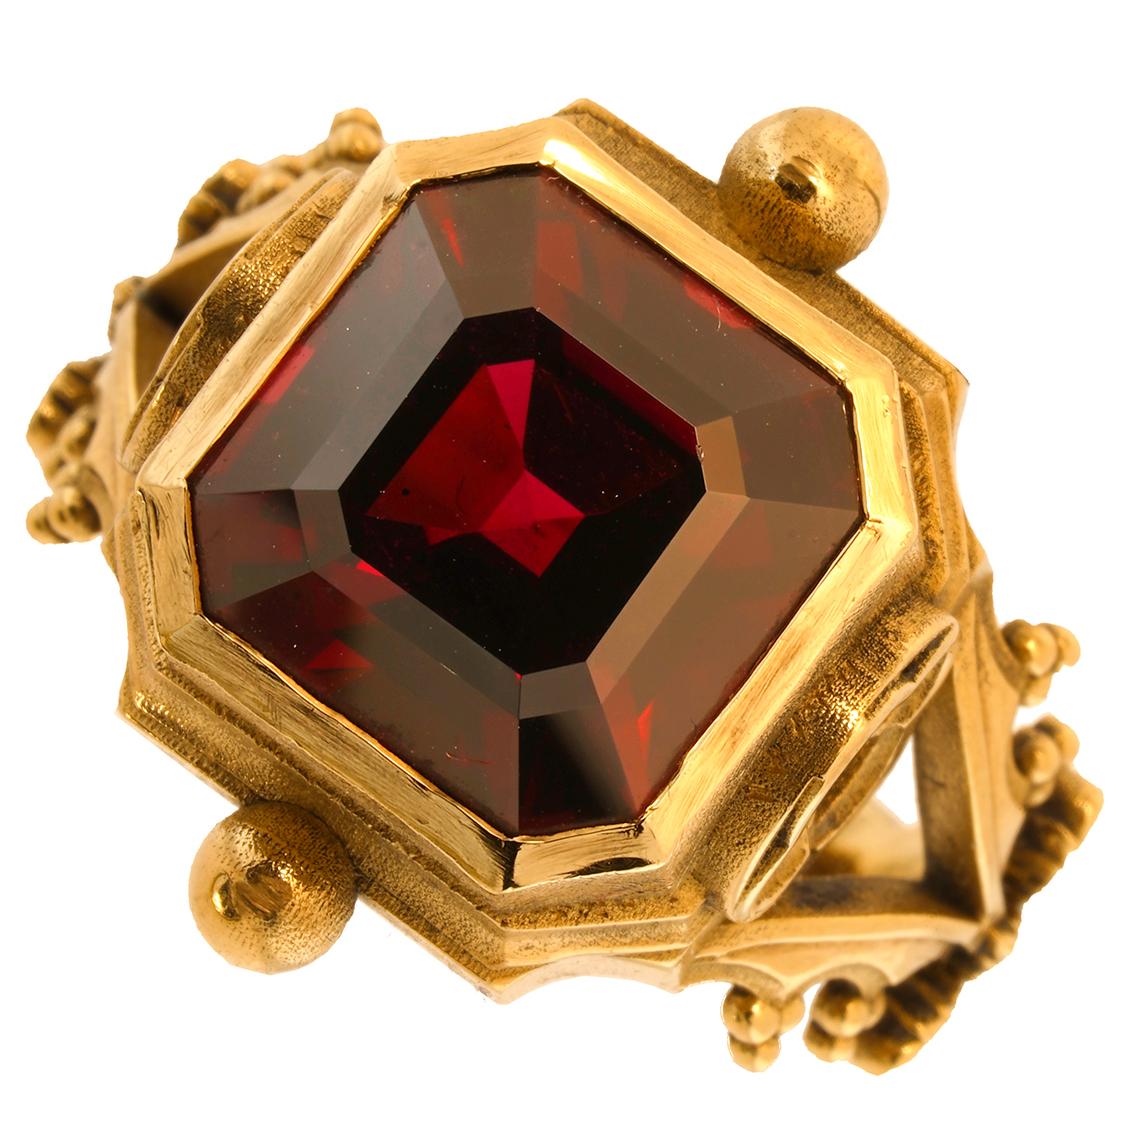 Intricately handcrafted in 9kt yellow gold this exquisite signet ring features a mesmerizing scarlet 13mm x 13mm Asscher cut garnet suspended like the deep hues of an oil painted ceiling above an ornate gothic gallery. Adorned with quatrefoil